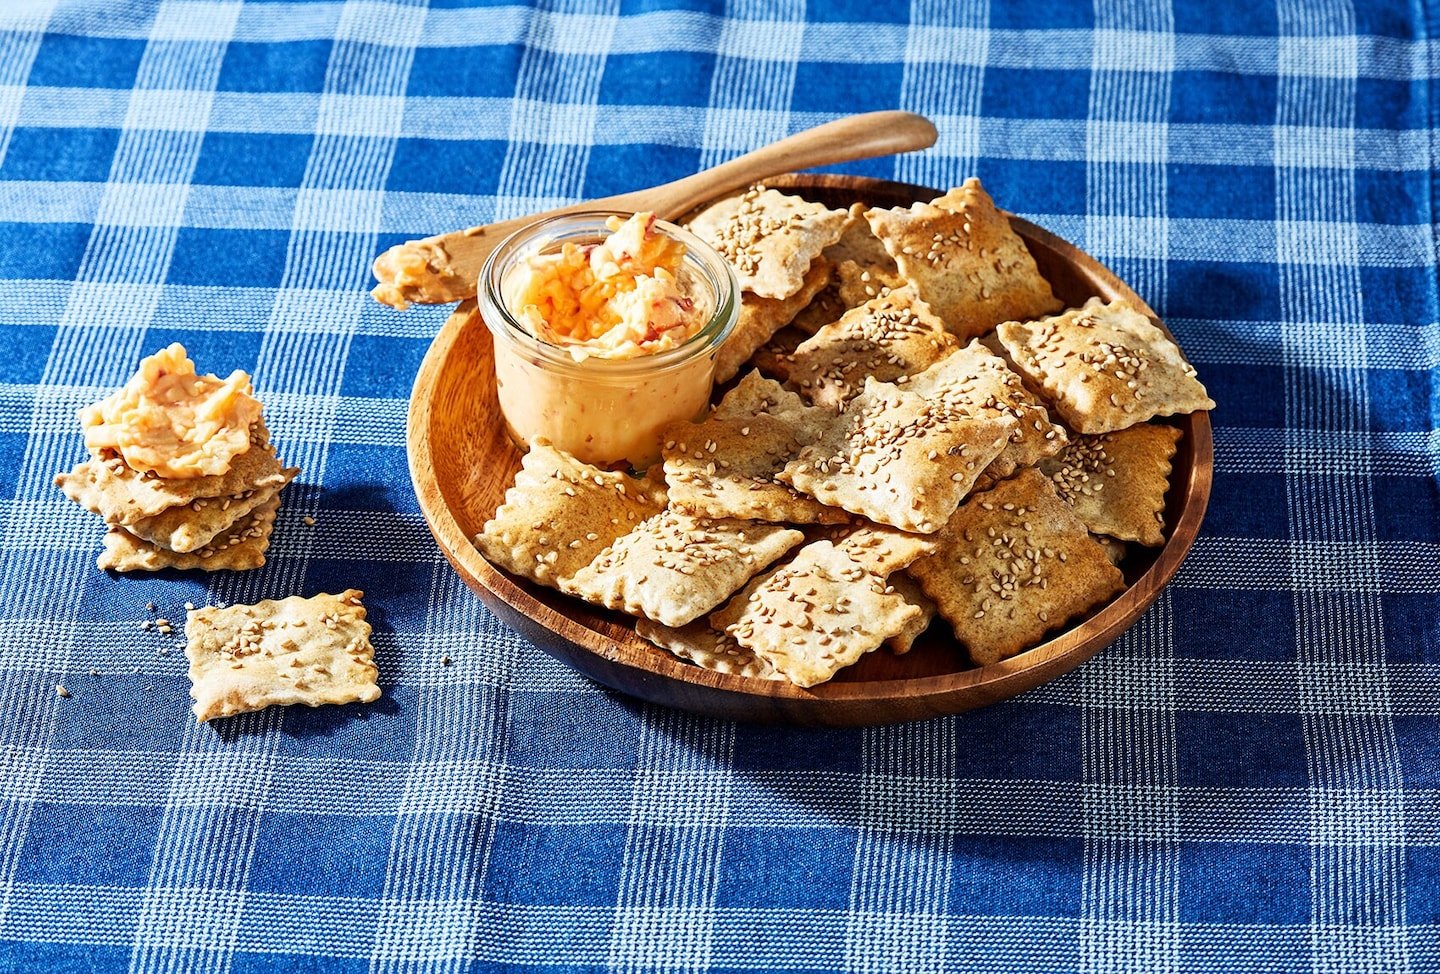 Want to make the most of your sourdough starter? Start with these castoff crackers.